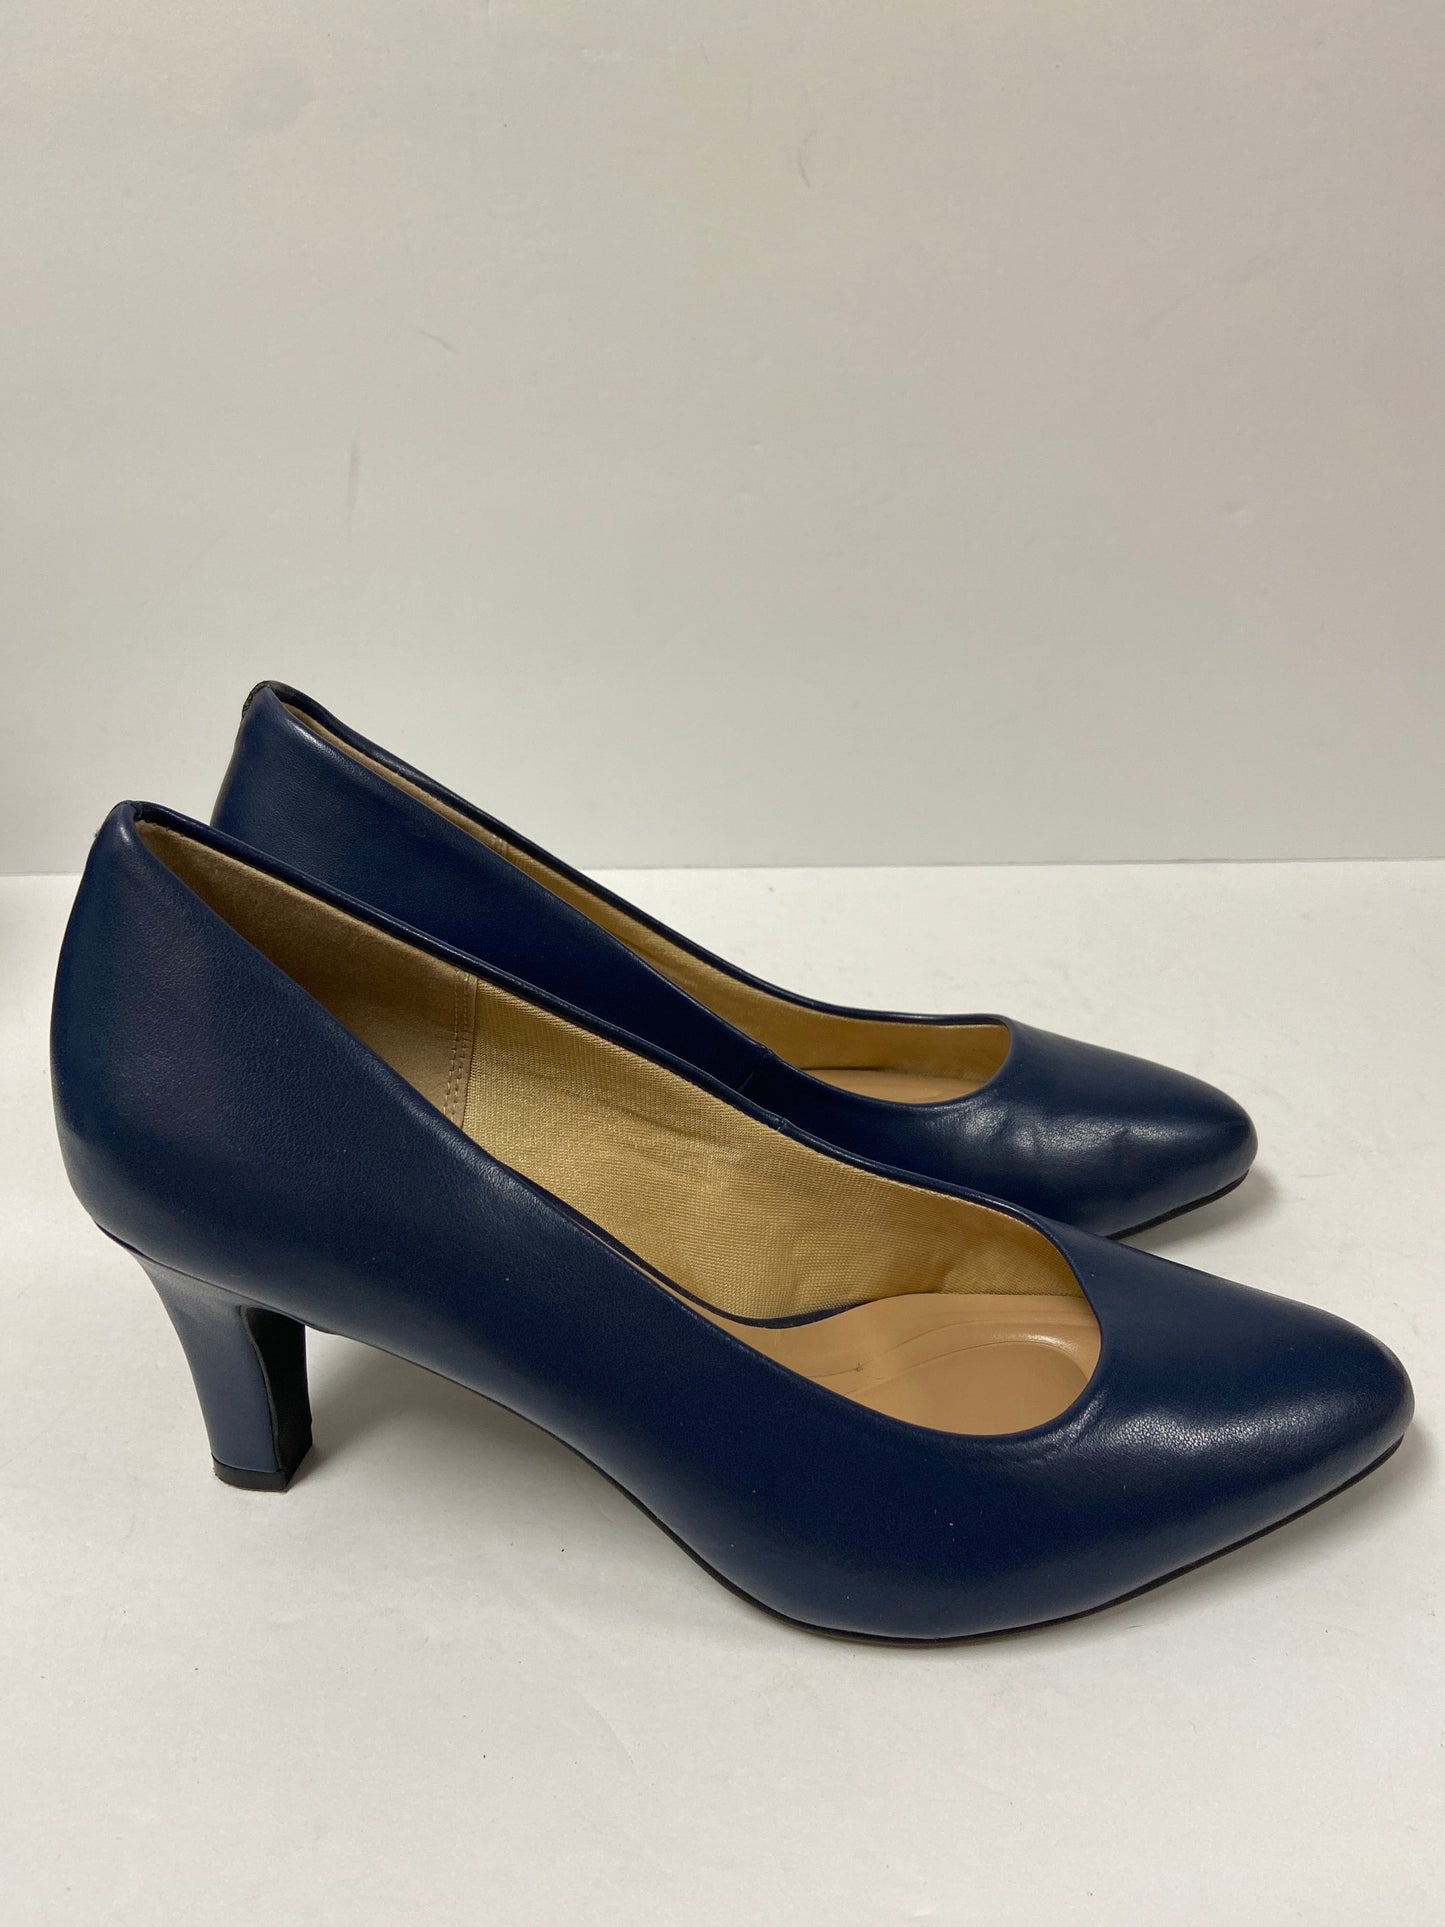 Shoes Heels Stiletto By Kelly And Katie  Size: 9